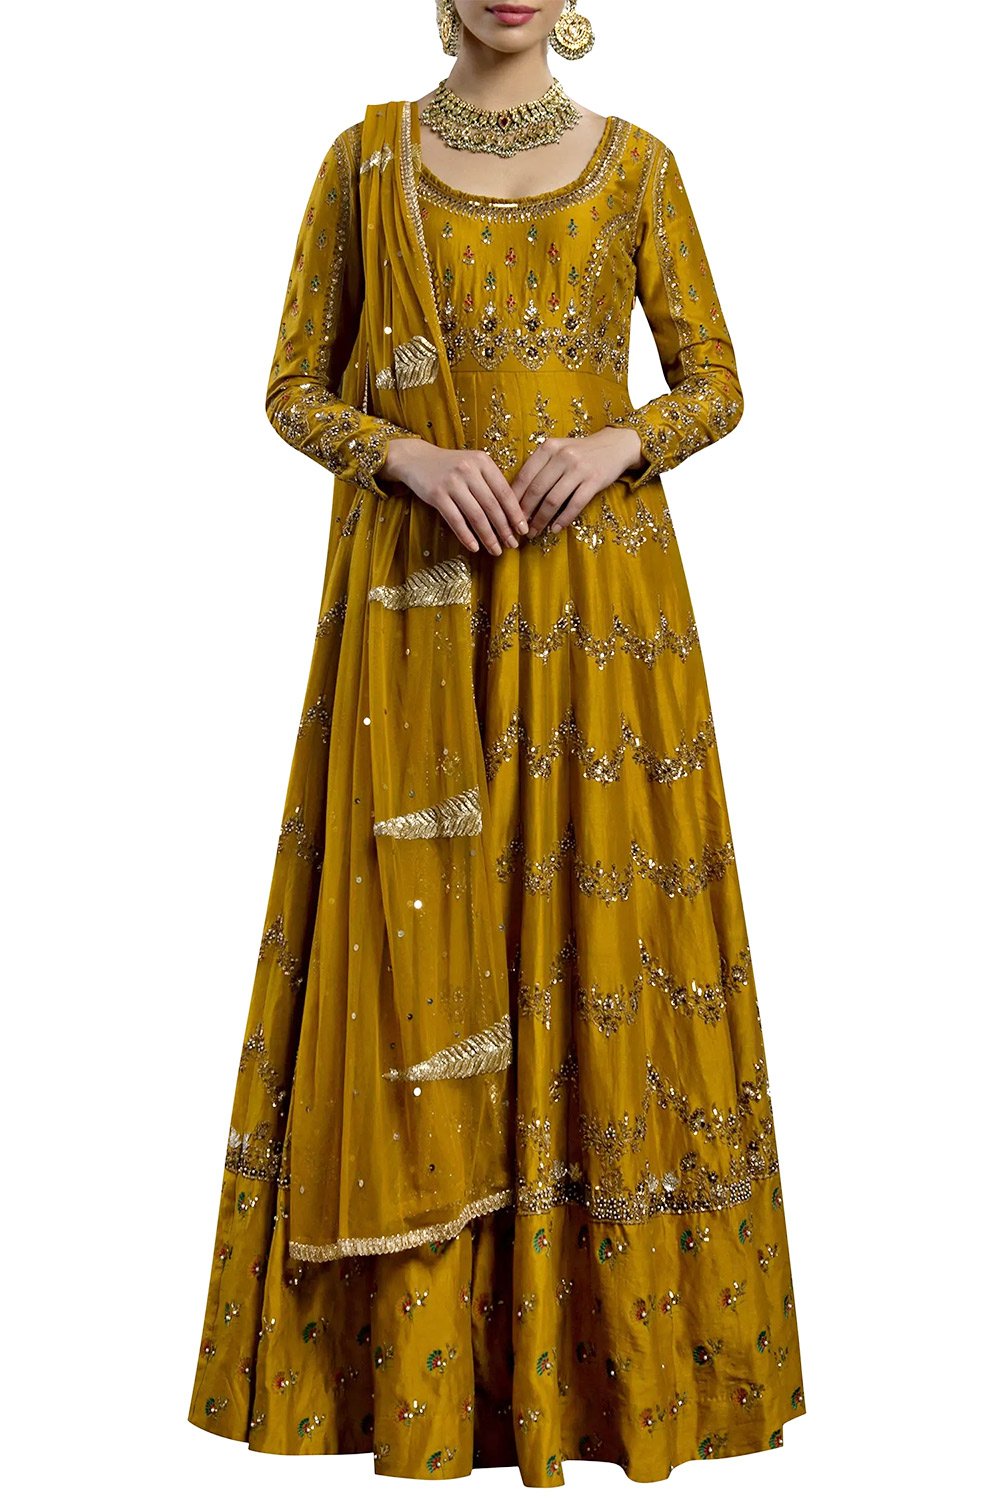 Mustard yellow embroidered anarkali set available online. Festive ...